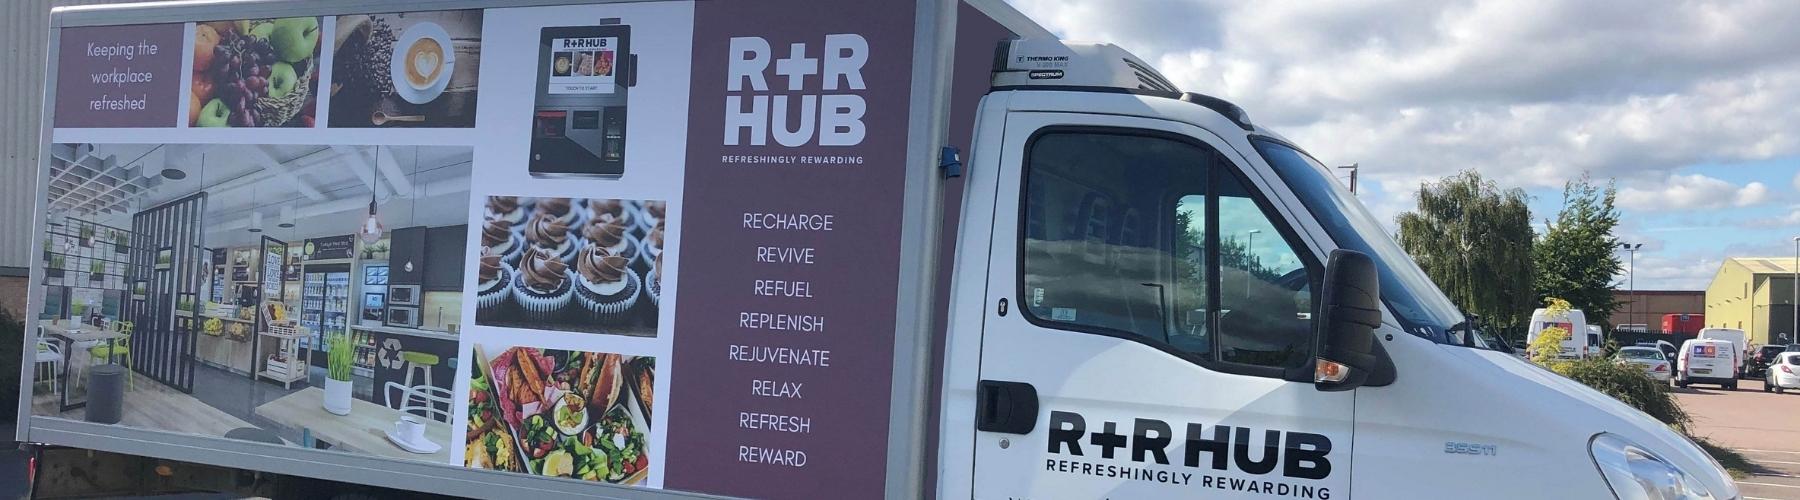 Record start to year sees Cema and R+R Hub move to hybrid model